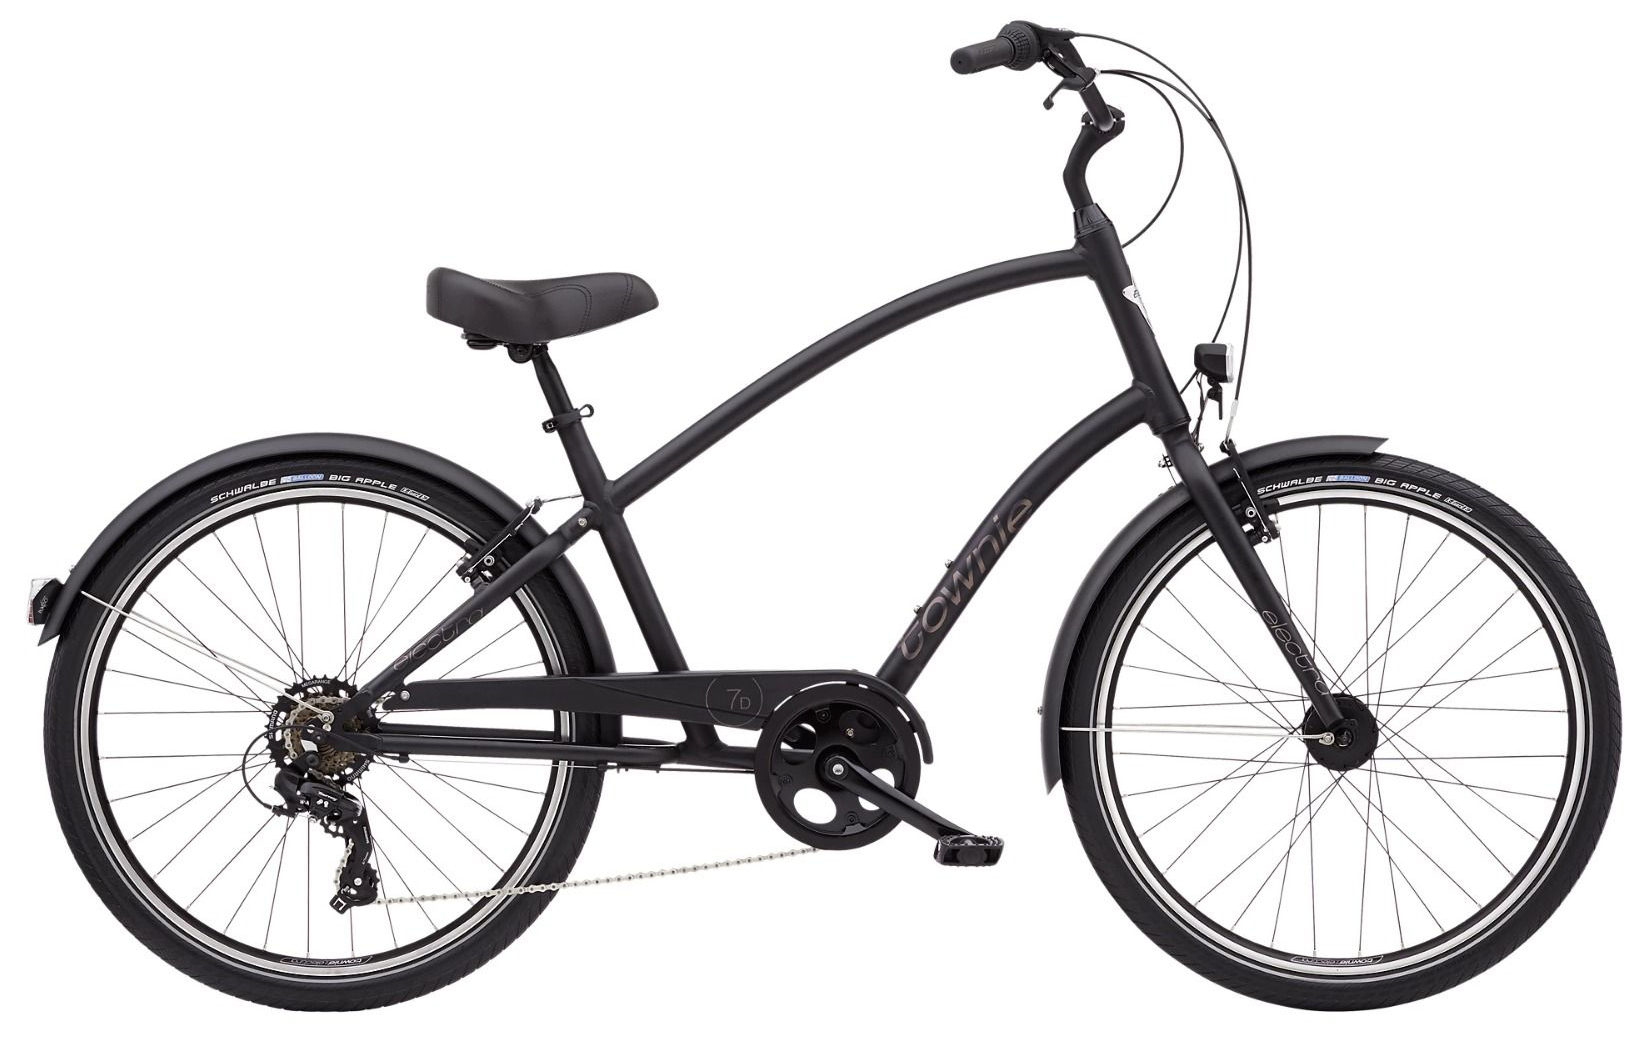  Велосипед Electra Townie 7D EQ Step Over (2021) 2021